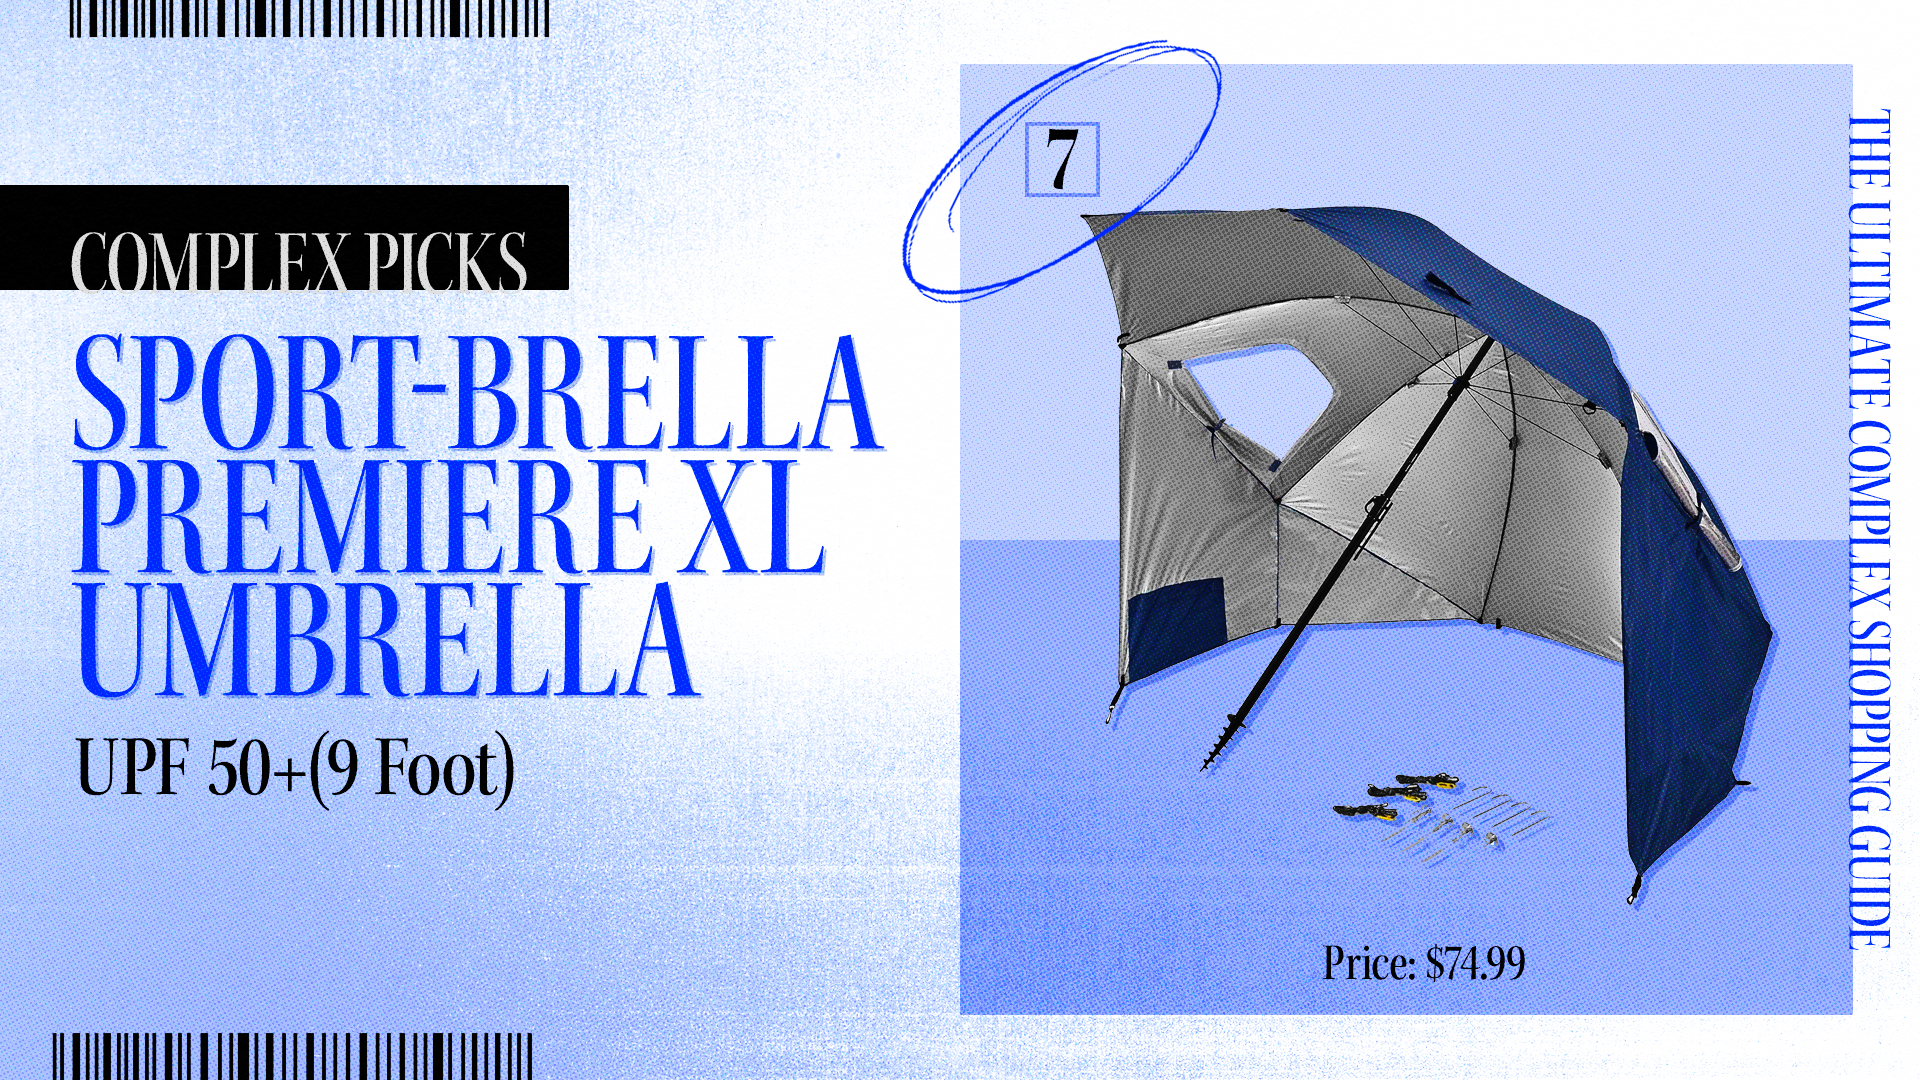 Complex Picks&#x27; Sport-Brella Premiere XL Umbrella featured in &quot;The Ultimate Complex Shopping Guide&quot; priced at $74.99, offering UPF 50+ and 9-foot coverage